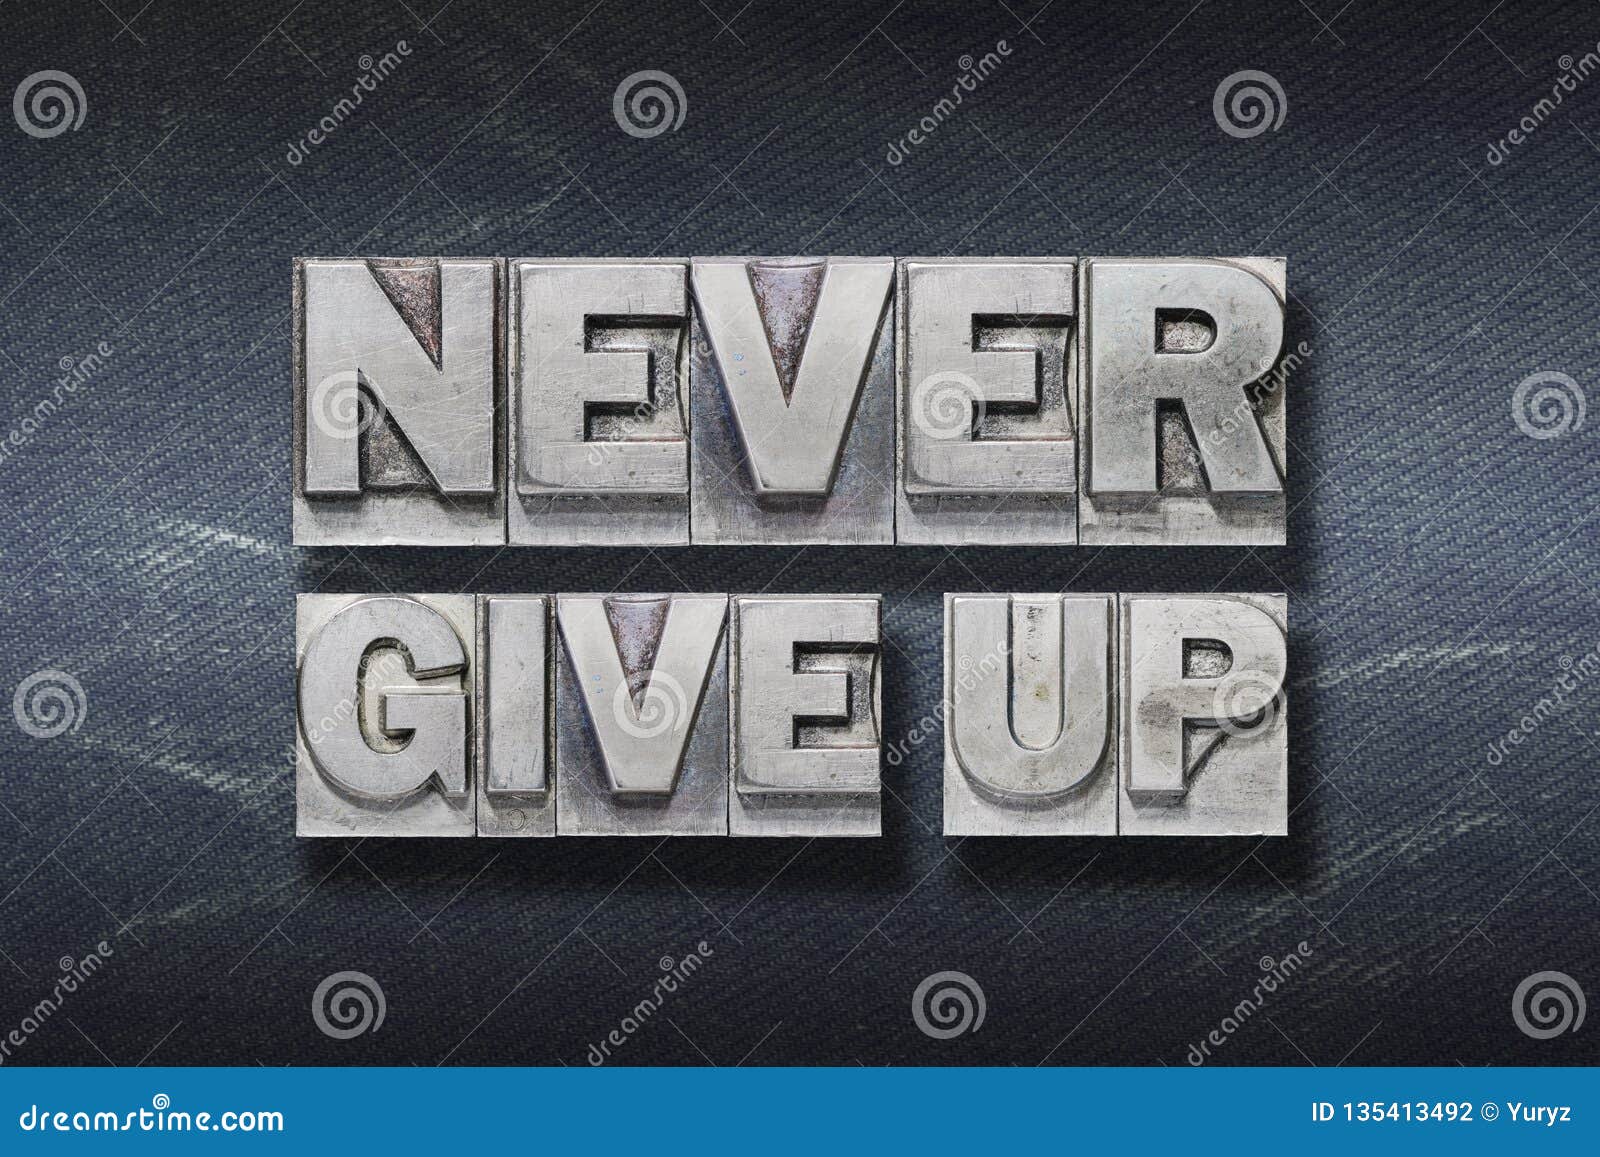 never give up den